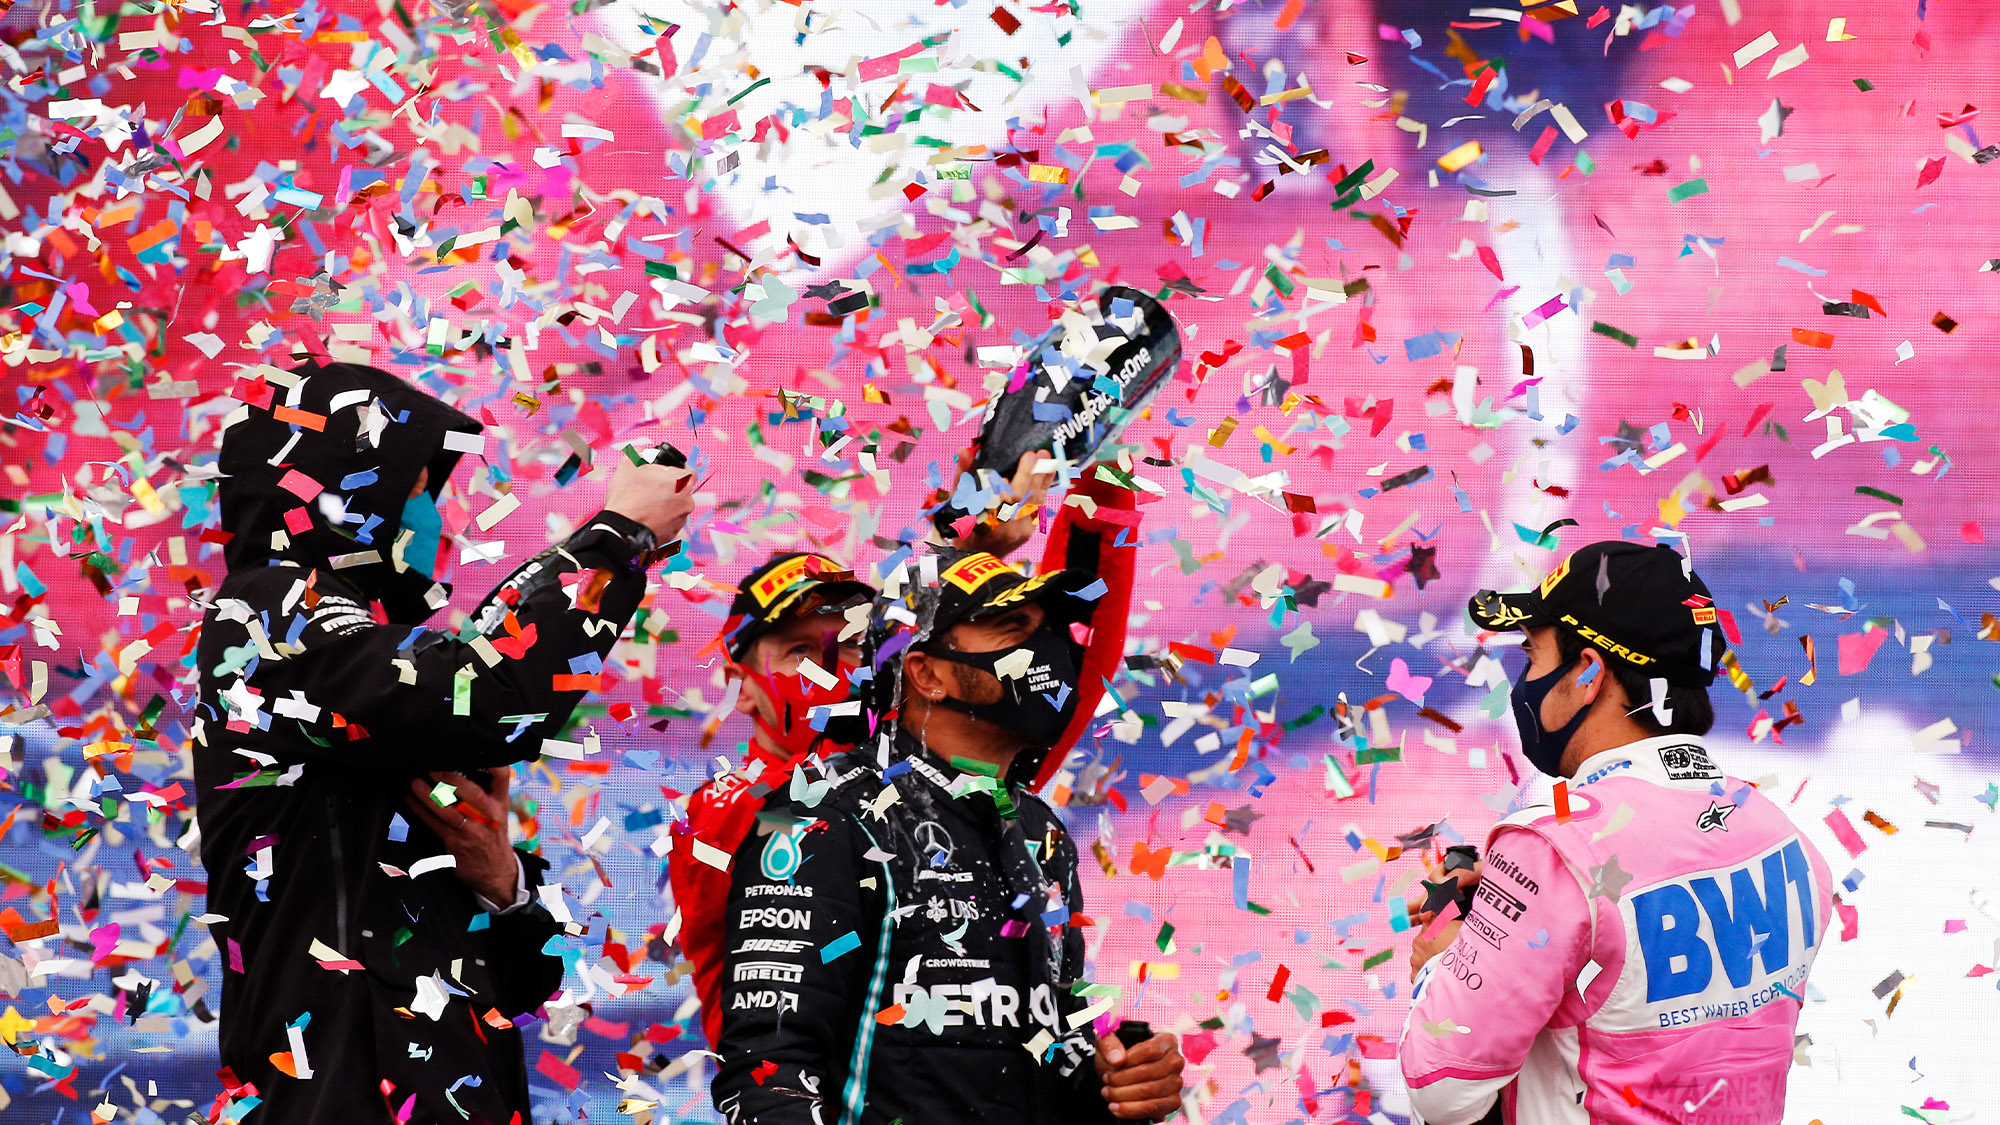 toto-wolff-sebastian-vettel-and-sergio-perez-spray-lewis-hamilton-with-champagne-on-the-istanbul-park-podium-after-the-2020-f1-turkish-grand-prix.jpg